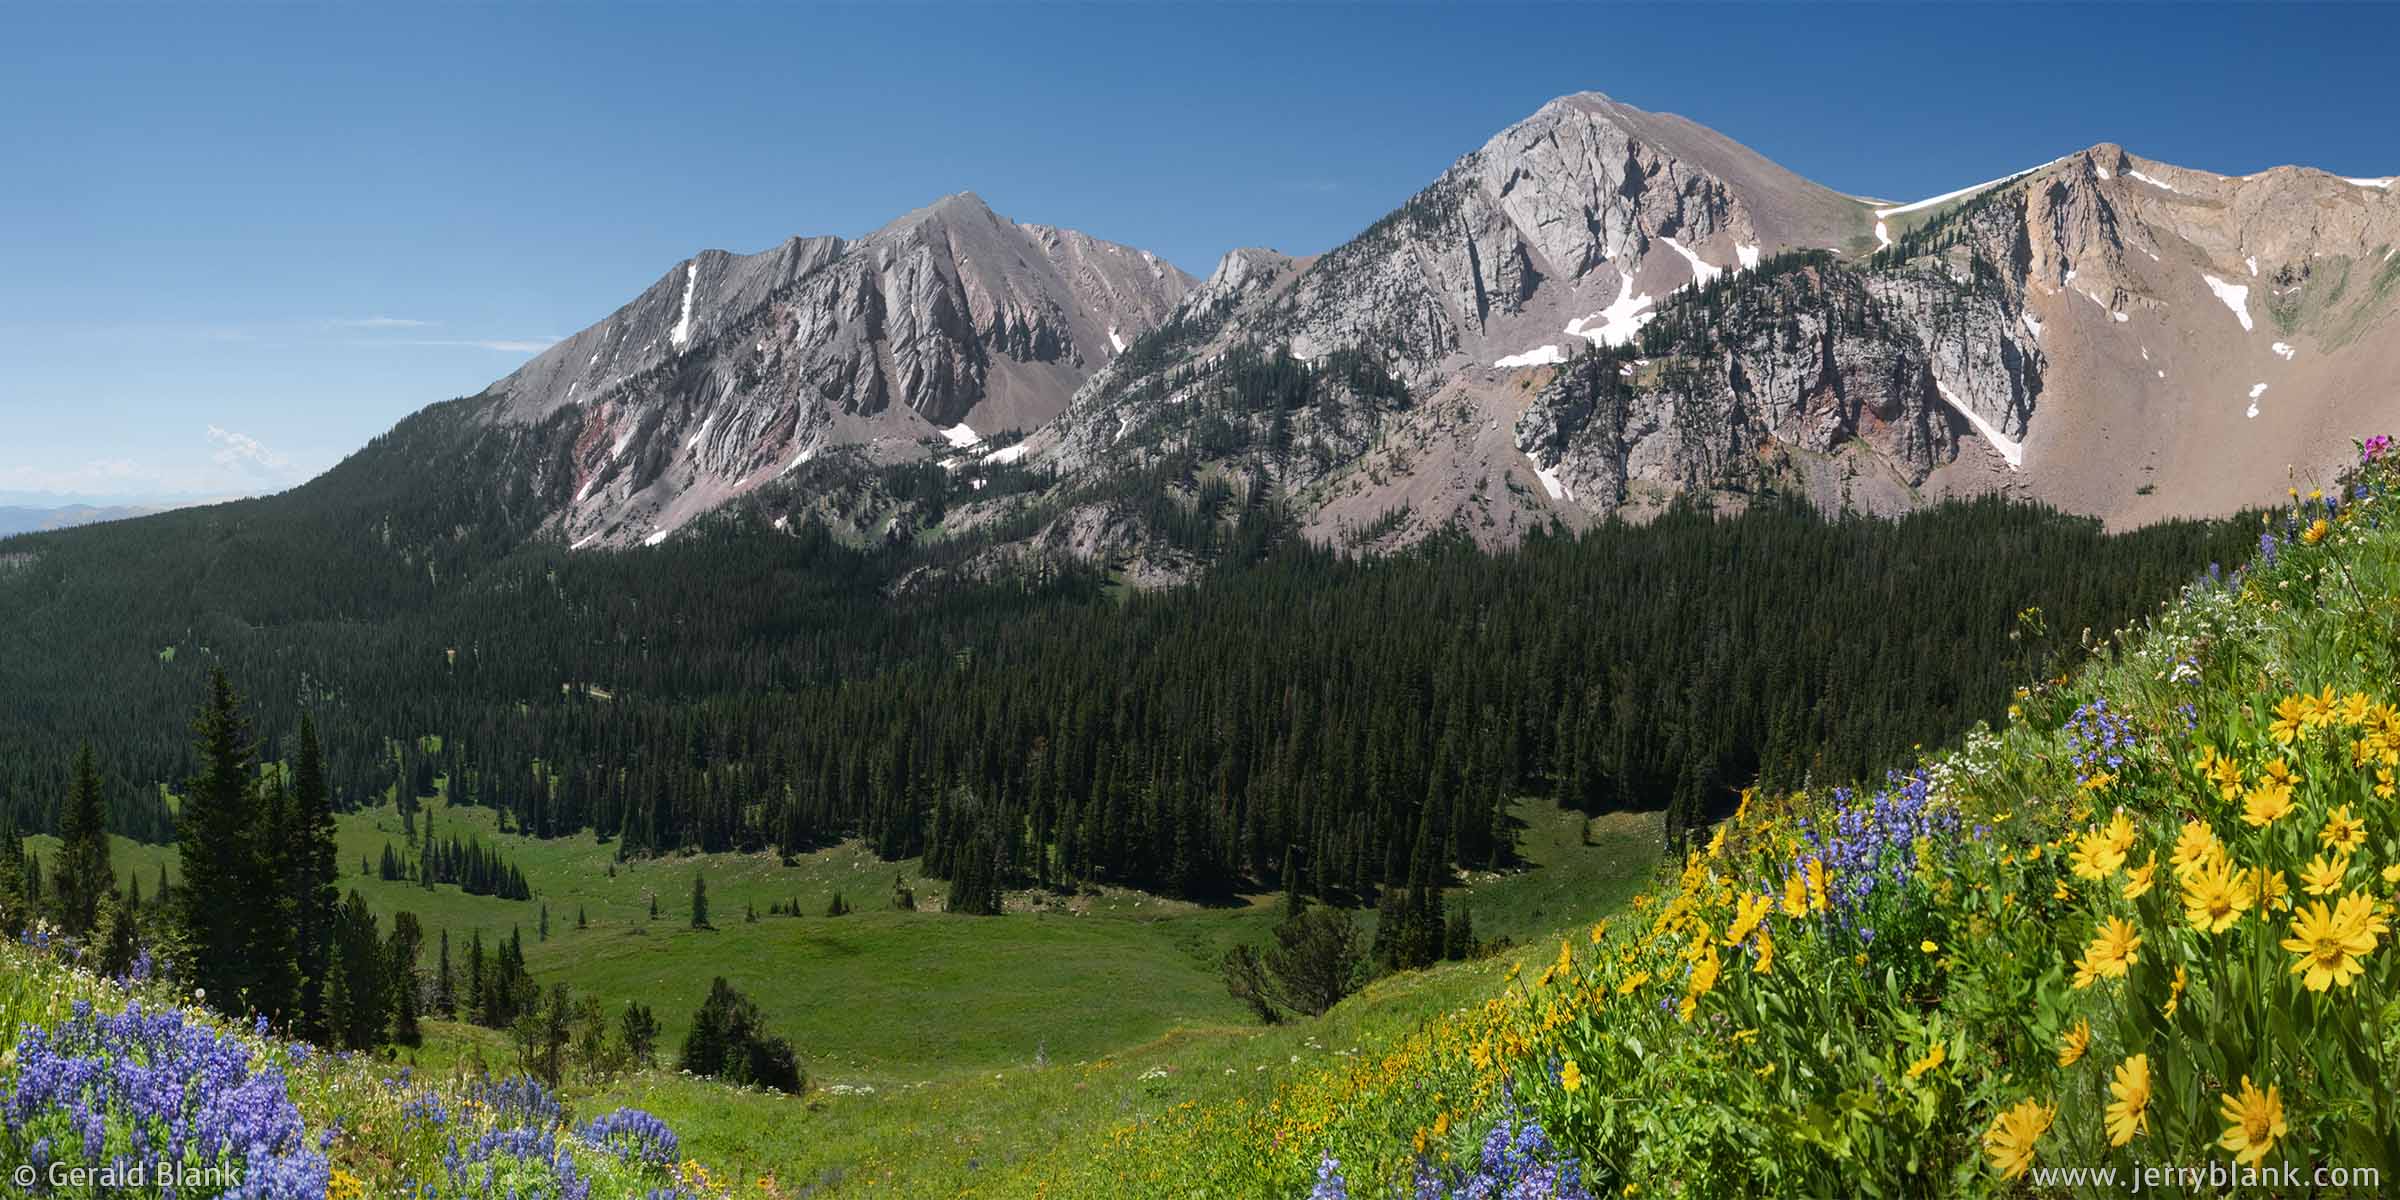 #09404 - Lupines and arnica cover a meadow northeast of Sacagawea Peak and Hardscrabble Peak in Montana’s Bridger Mountains - wildflowers panoramic photo by Jerry Blank